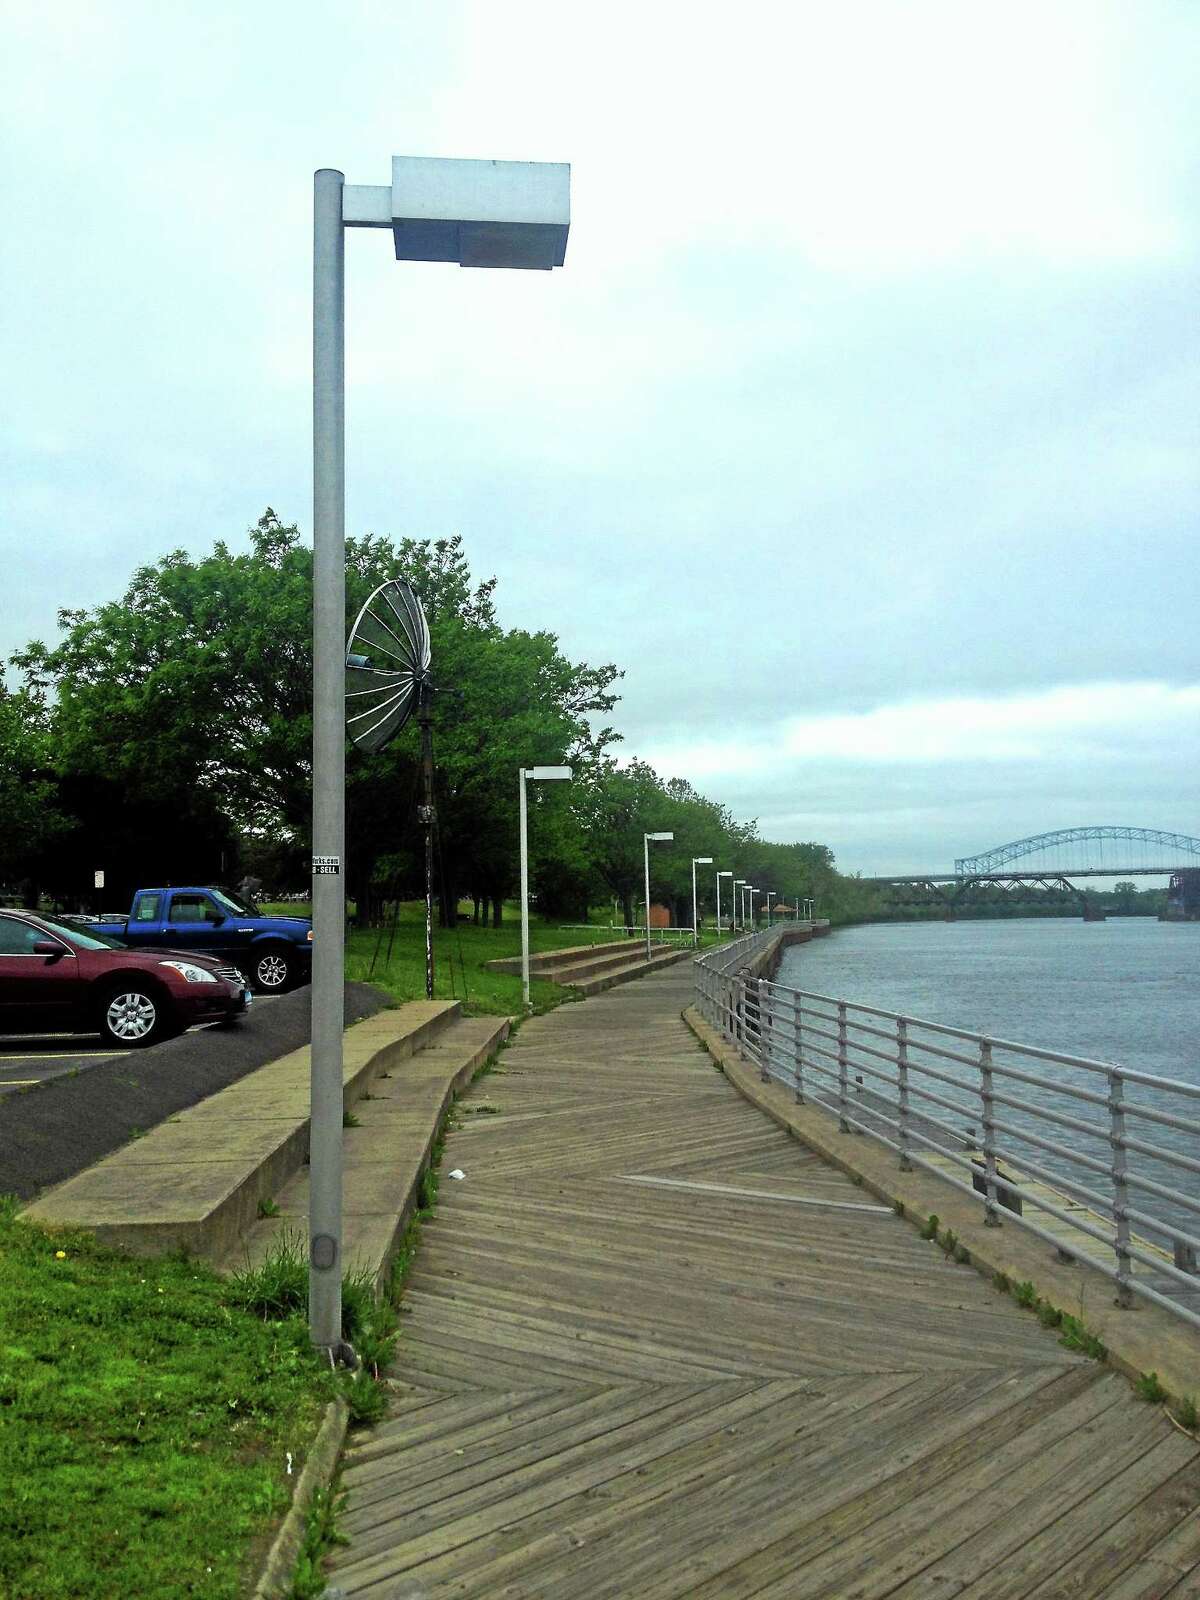 Alex Gecan - The Middletown Press The Public Works Department will seek approval to install 36 high-efficiency LED lights along the riverfront.